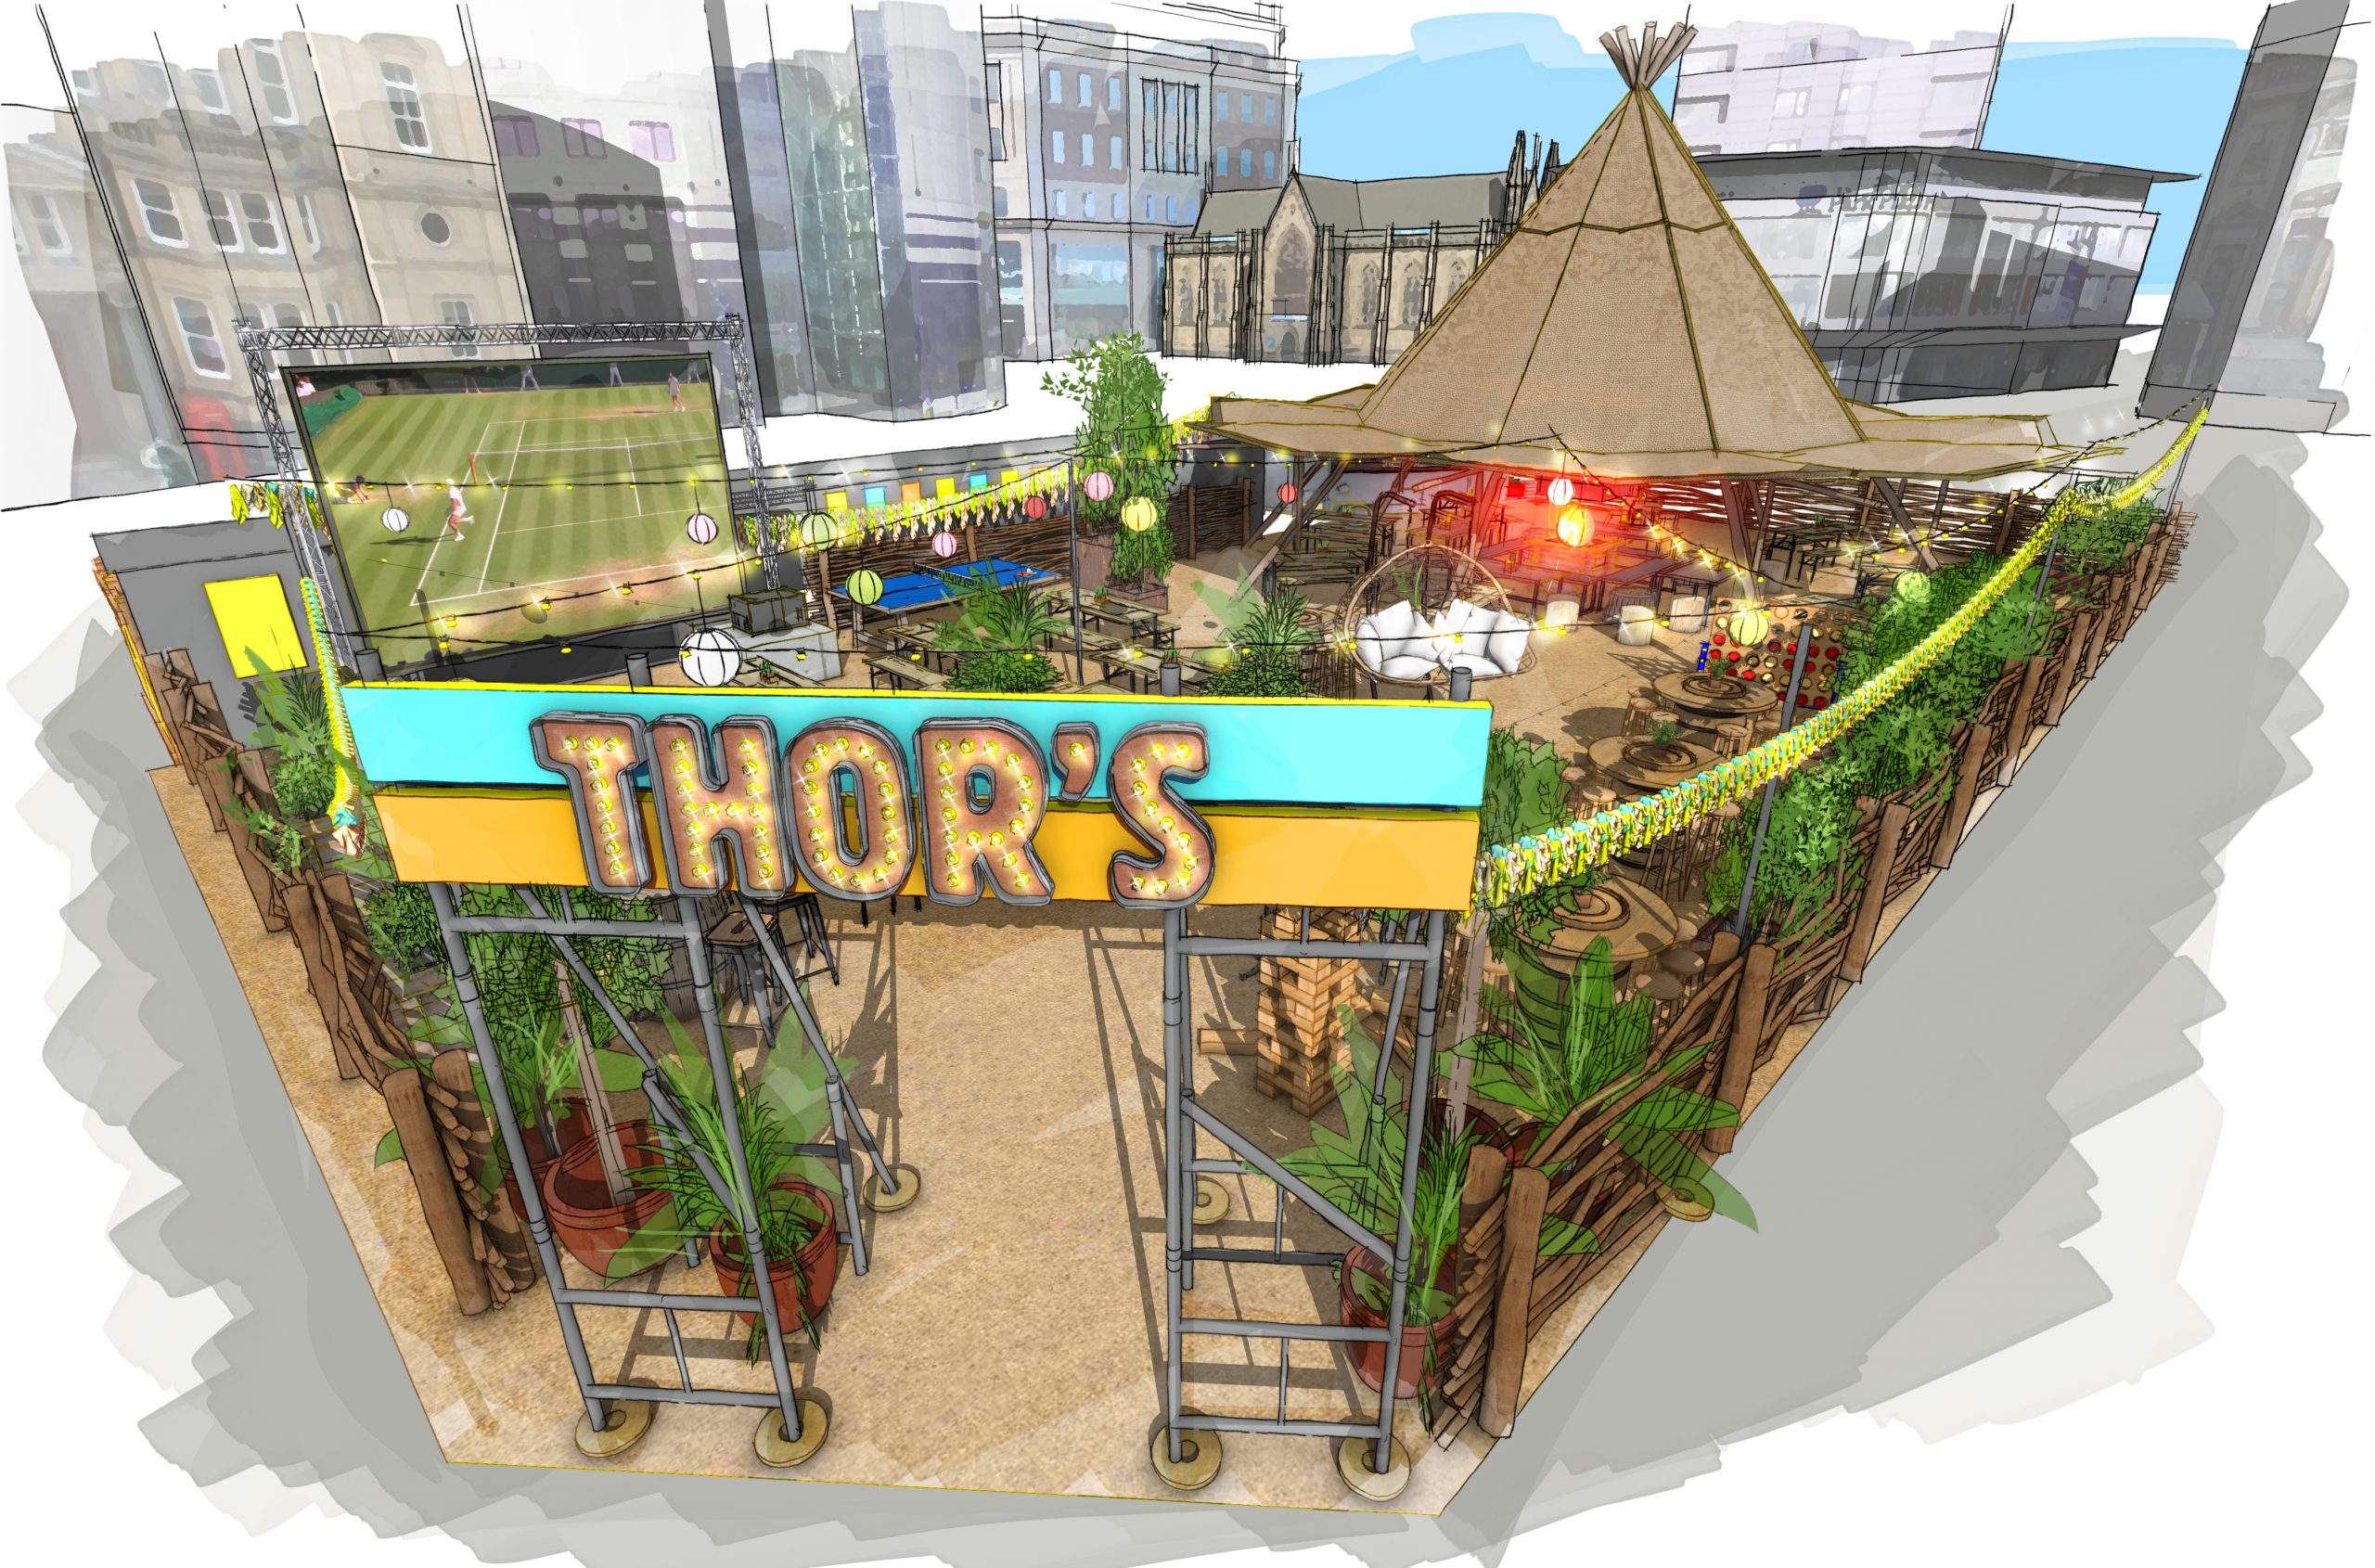 Thor's Tipi is opening a pop-up bar in Leeds City Square. Credit: Supplied